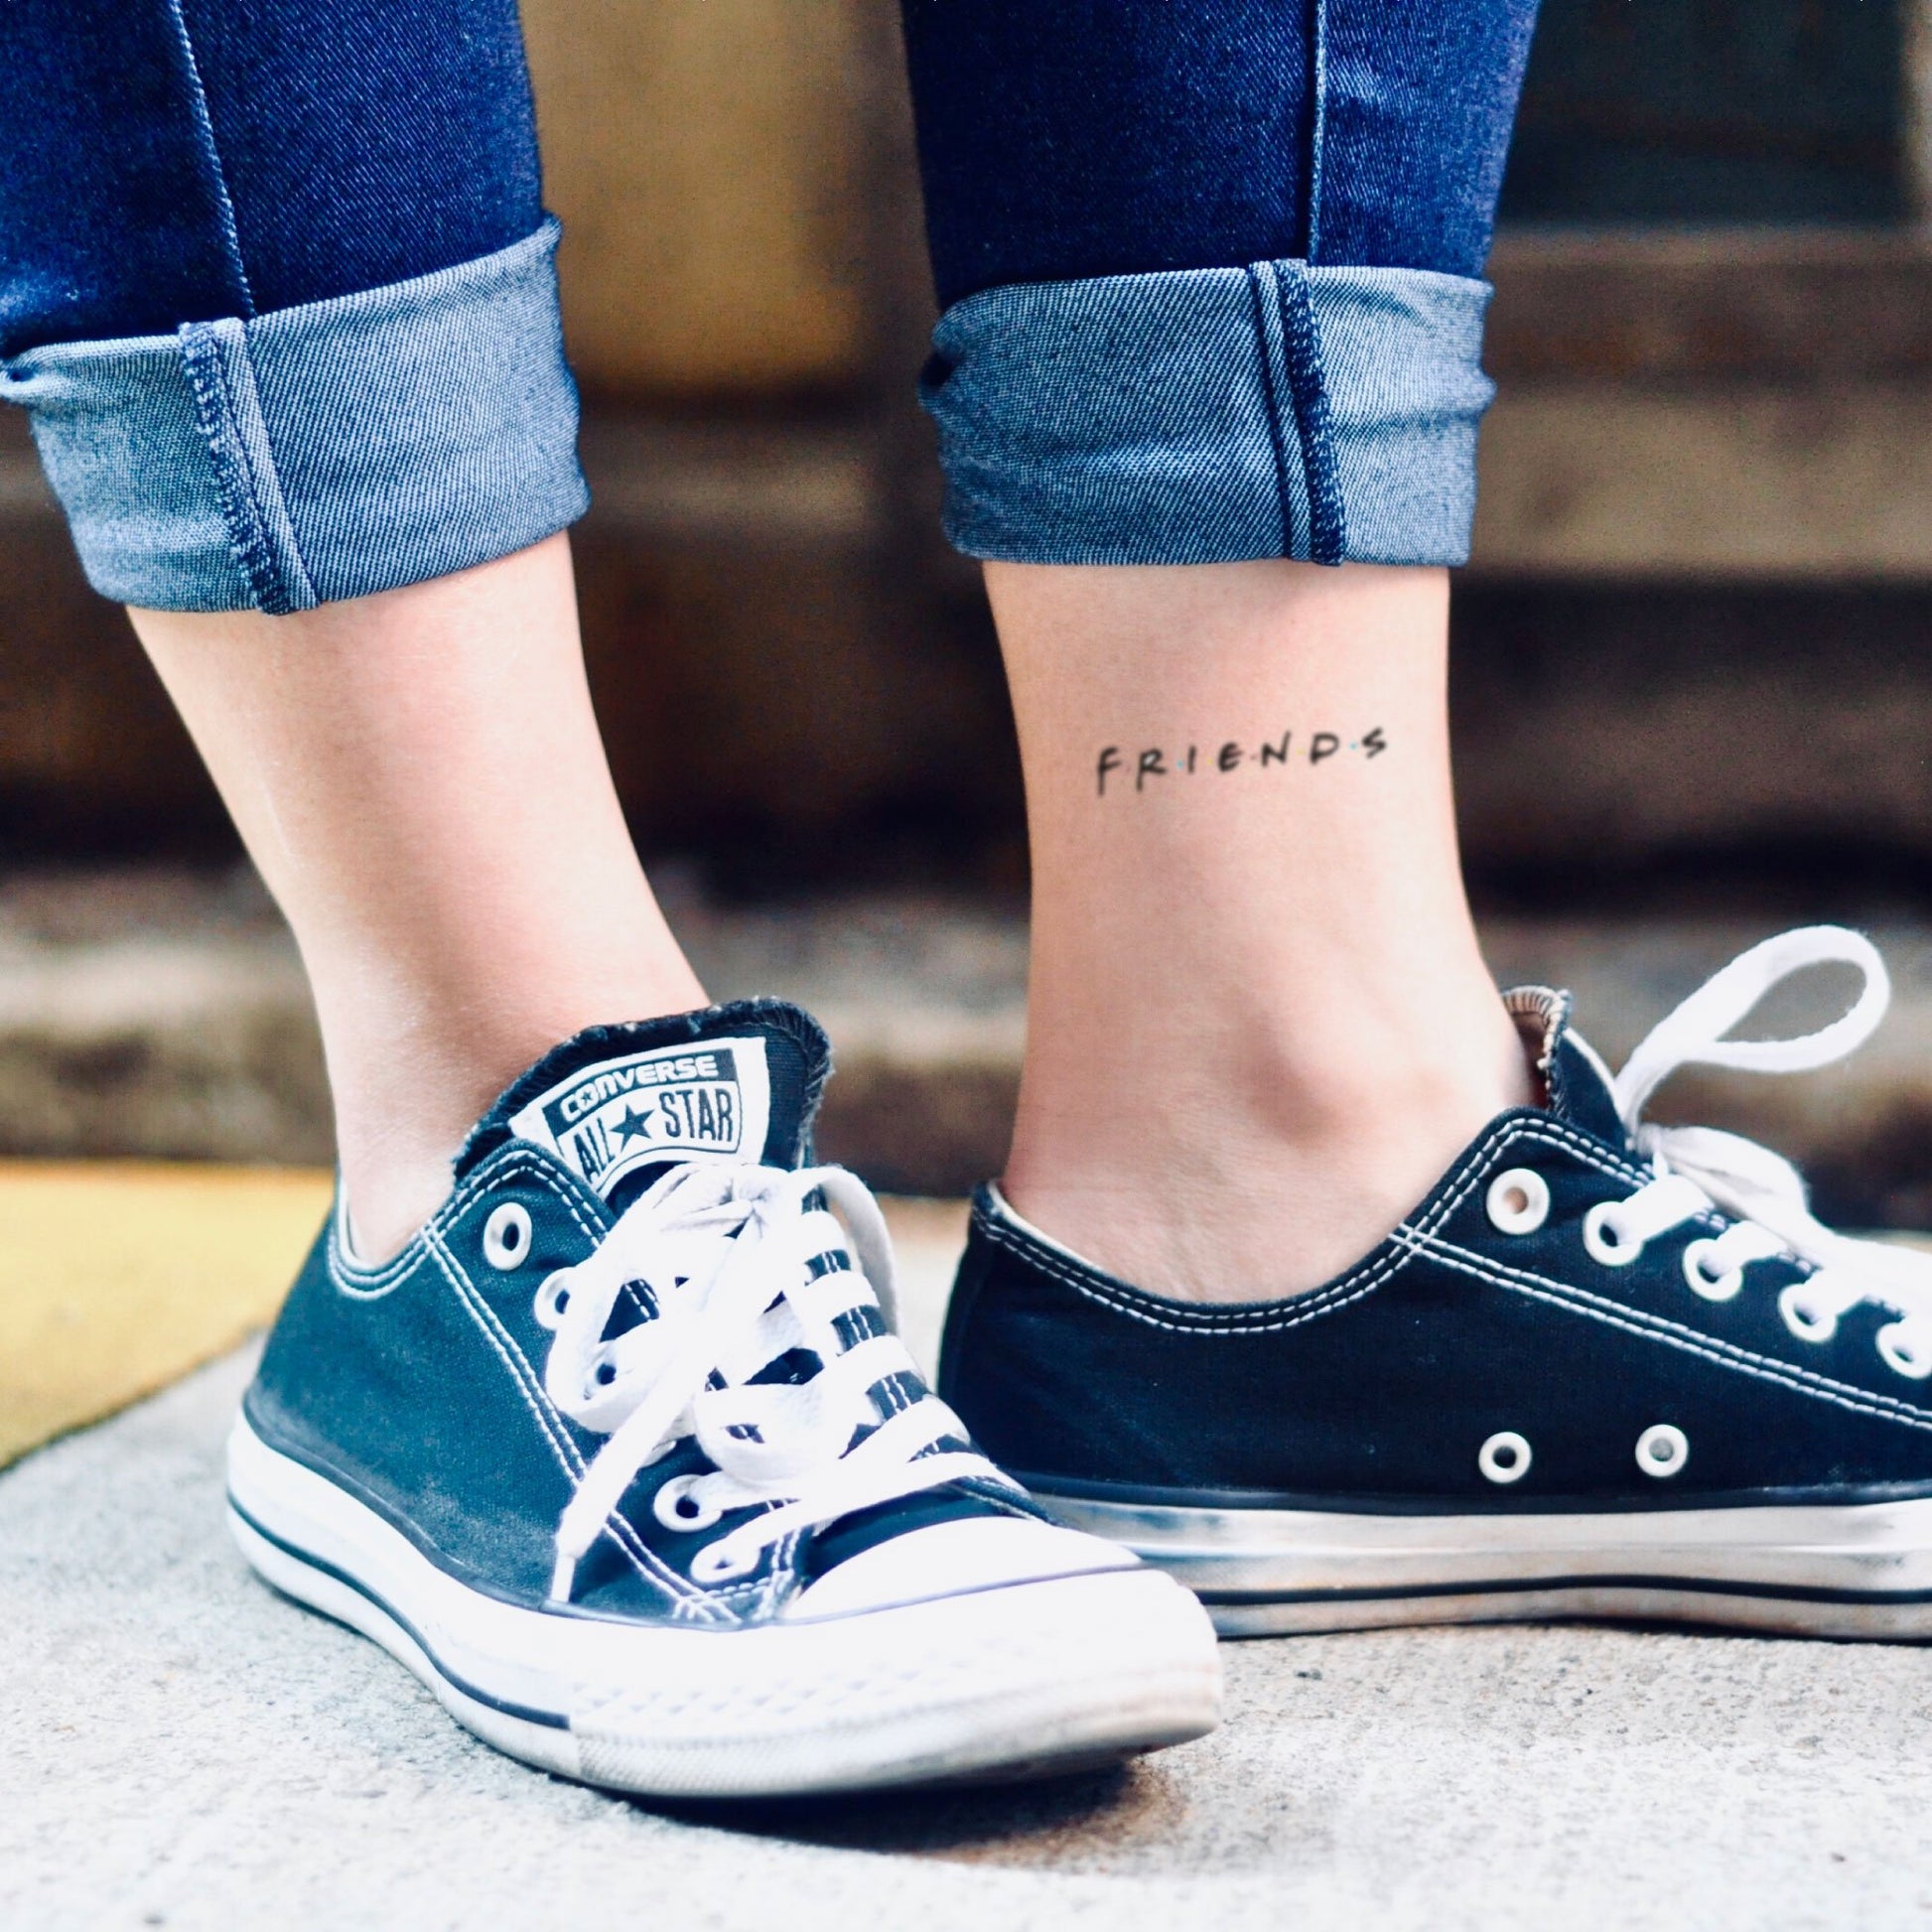 fake small friends tv show lettering temporary tattoo sticker design idea on ankle